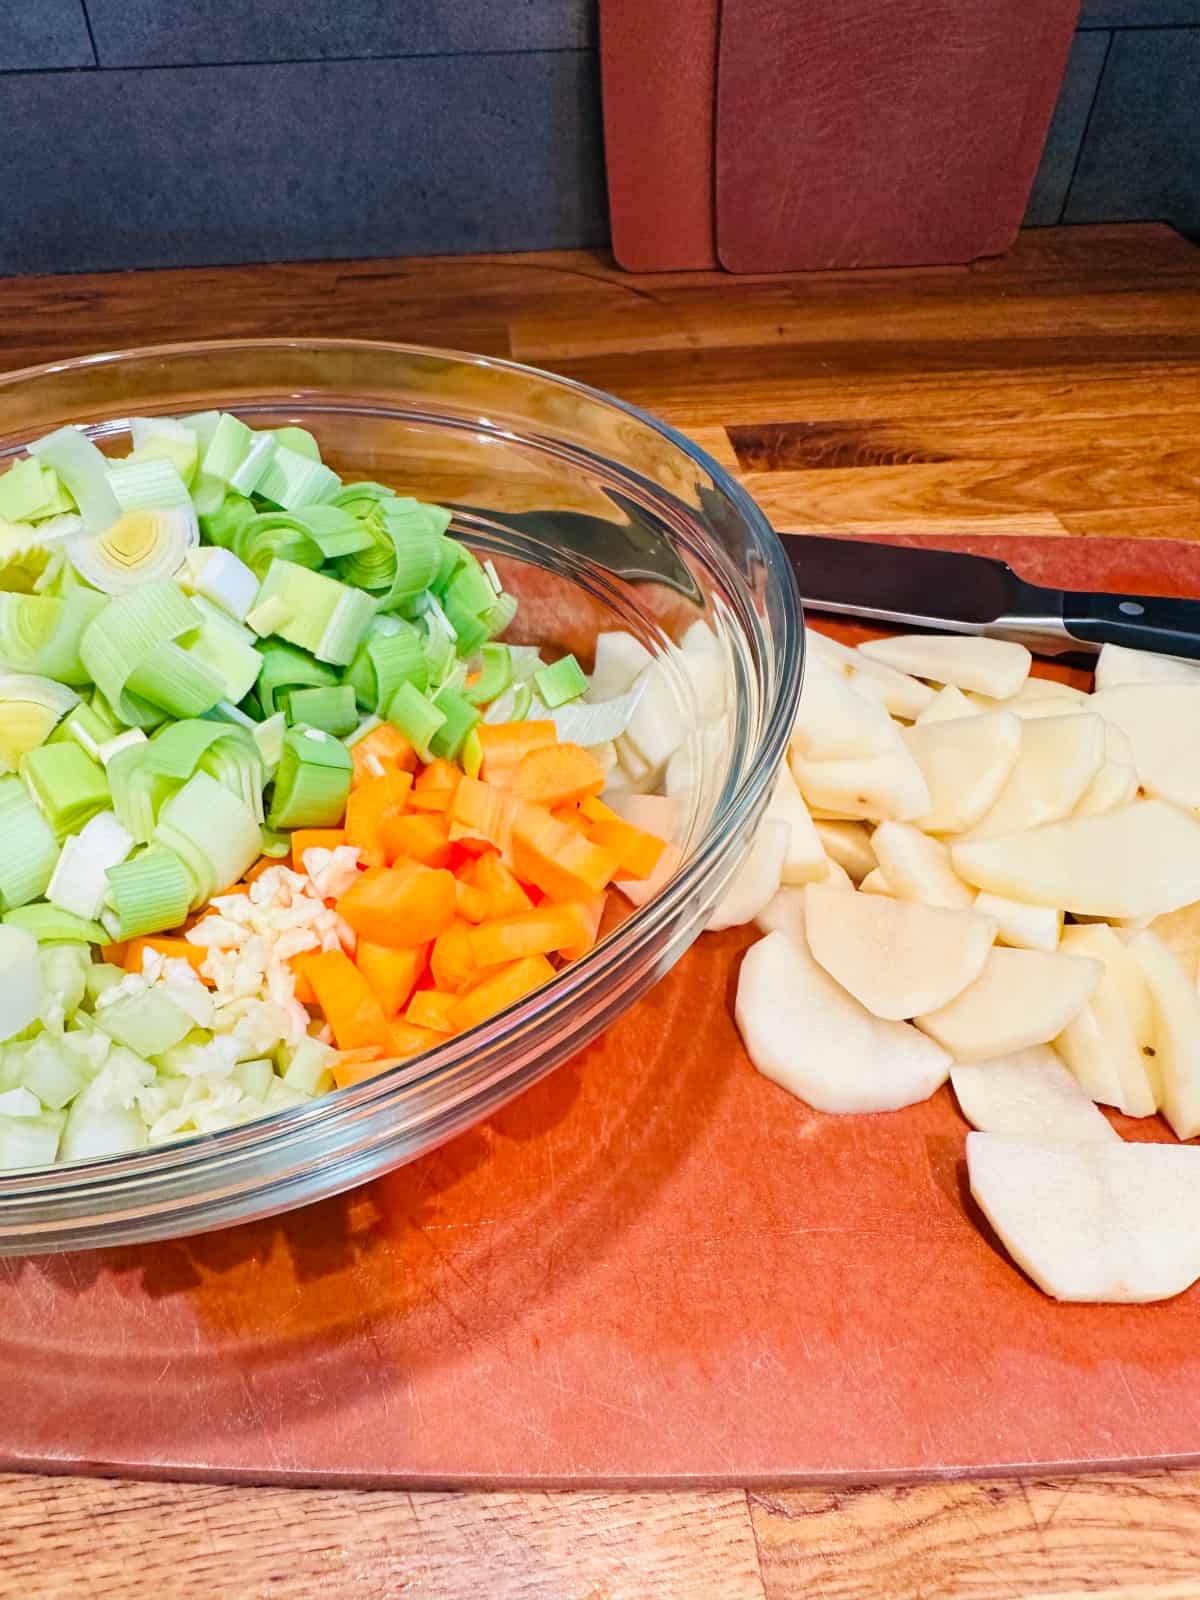 Glass bowl containing chopped leek, carrot, celery, and garlic next to chopped potatoes on a cutting board.